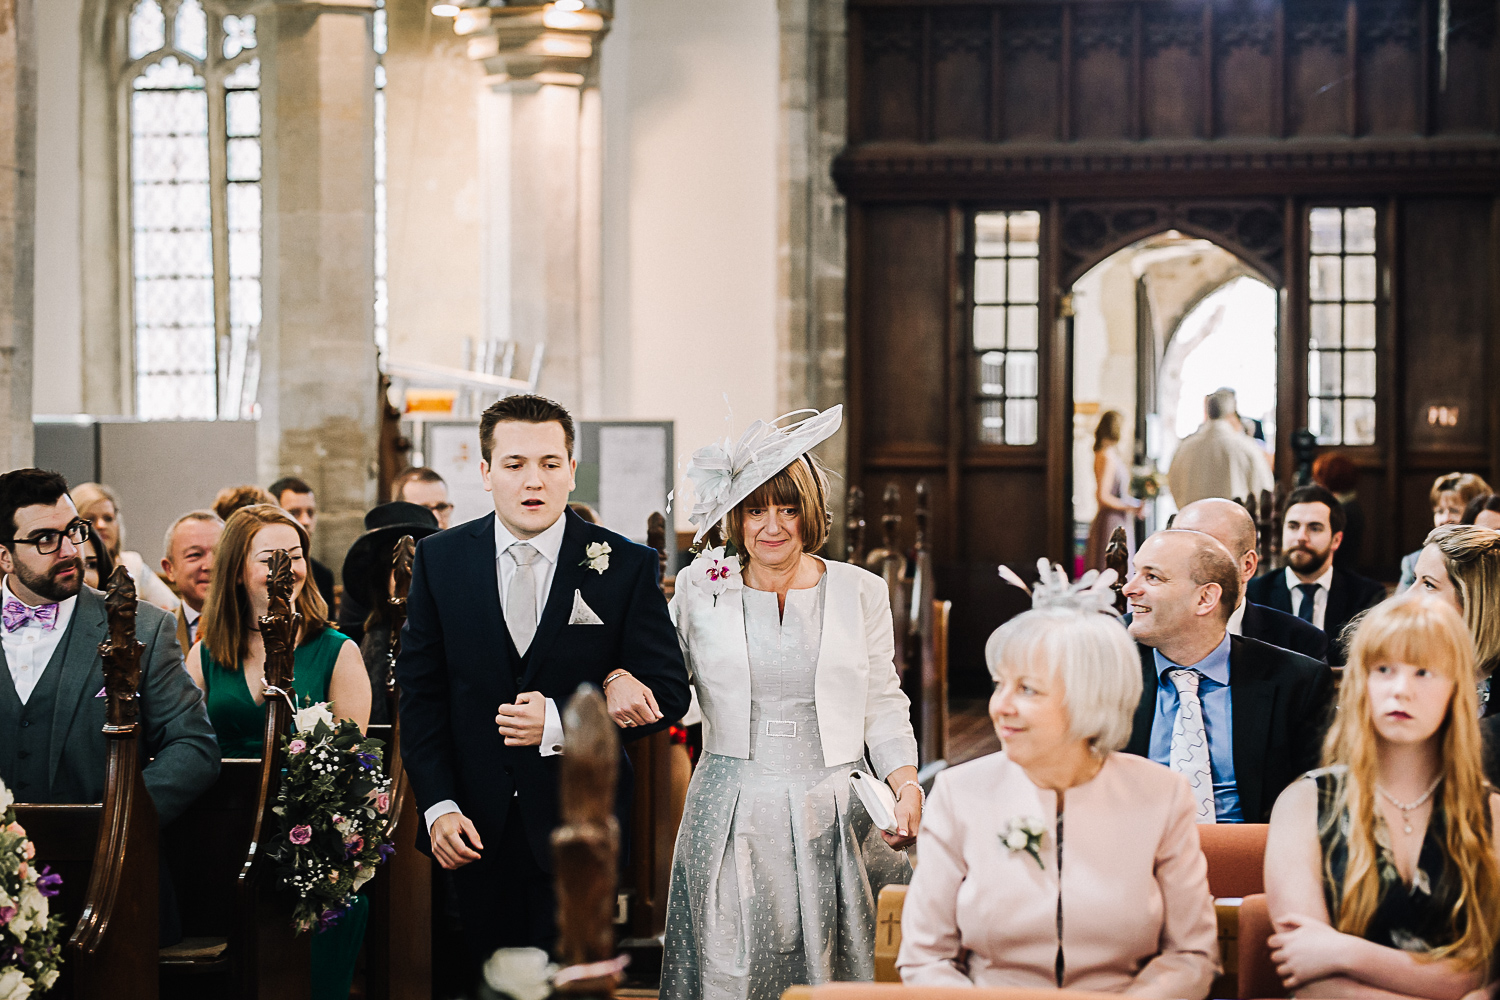 Mother of the Bride Walking Down the Aisle at Cottenham All Saint’s Church - Swynford Manor Wedding Photographer